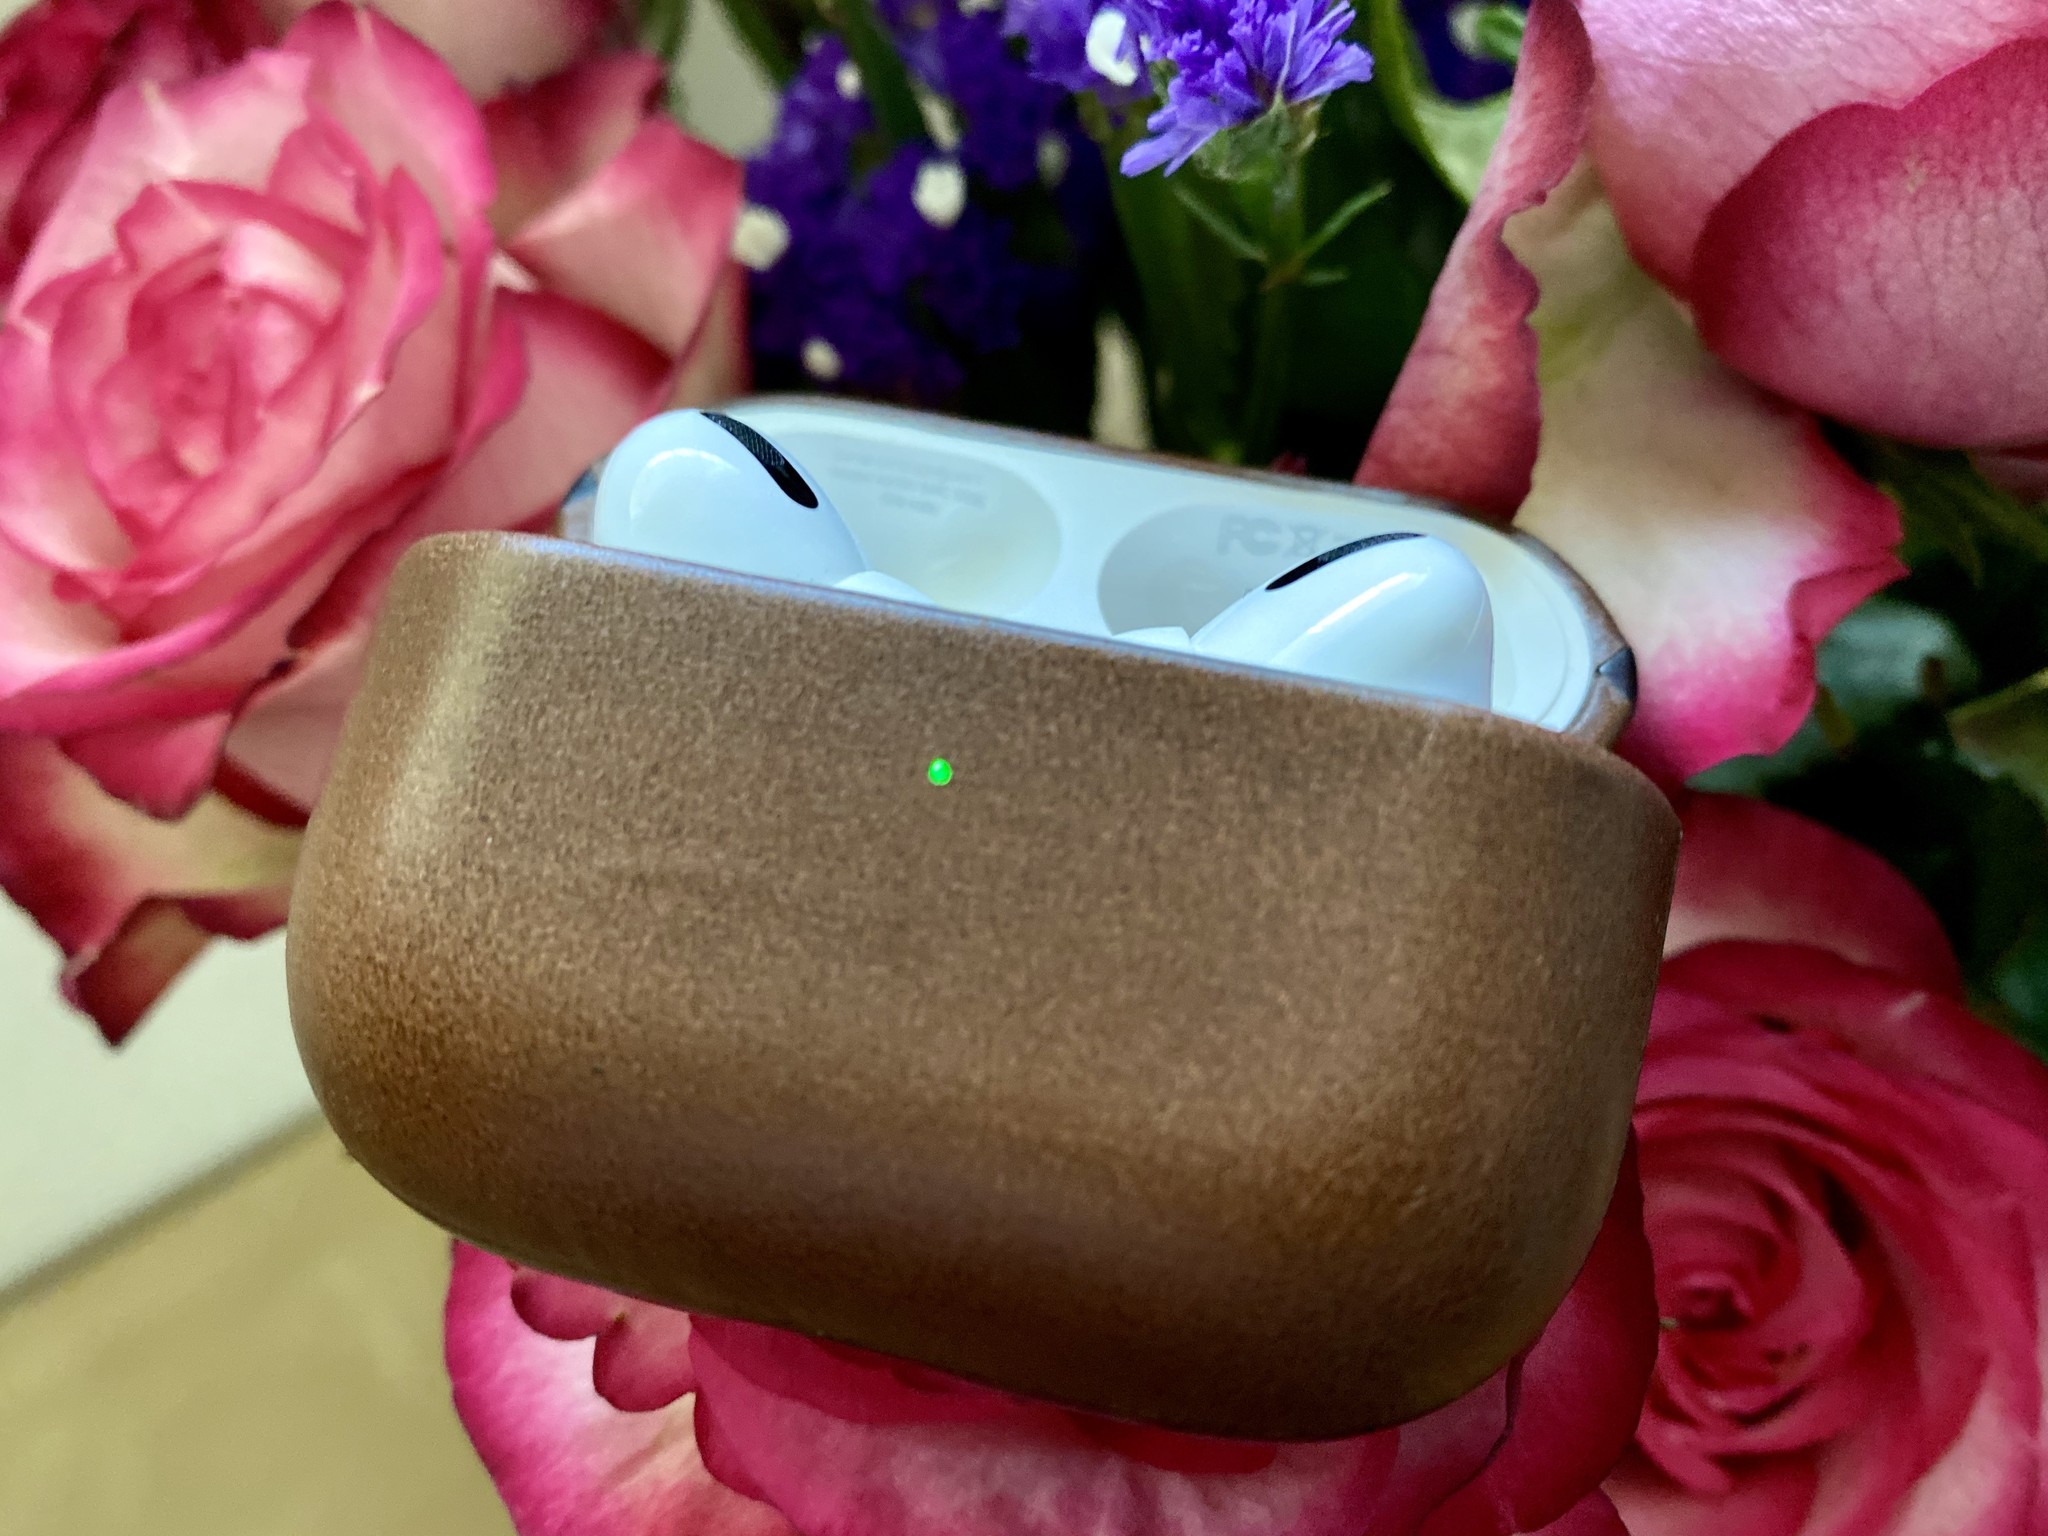 Nomad Rugged Case for AirPods Pro review: It's the little things that big difference | iMore